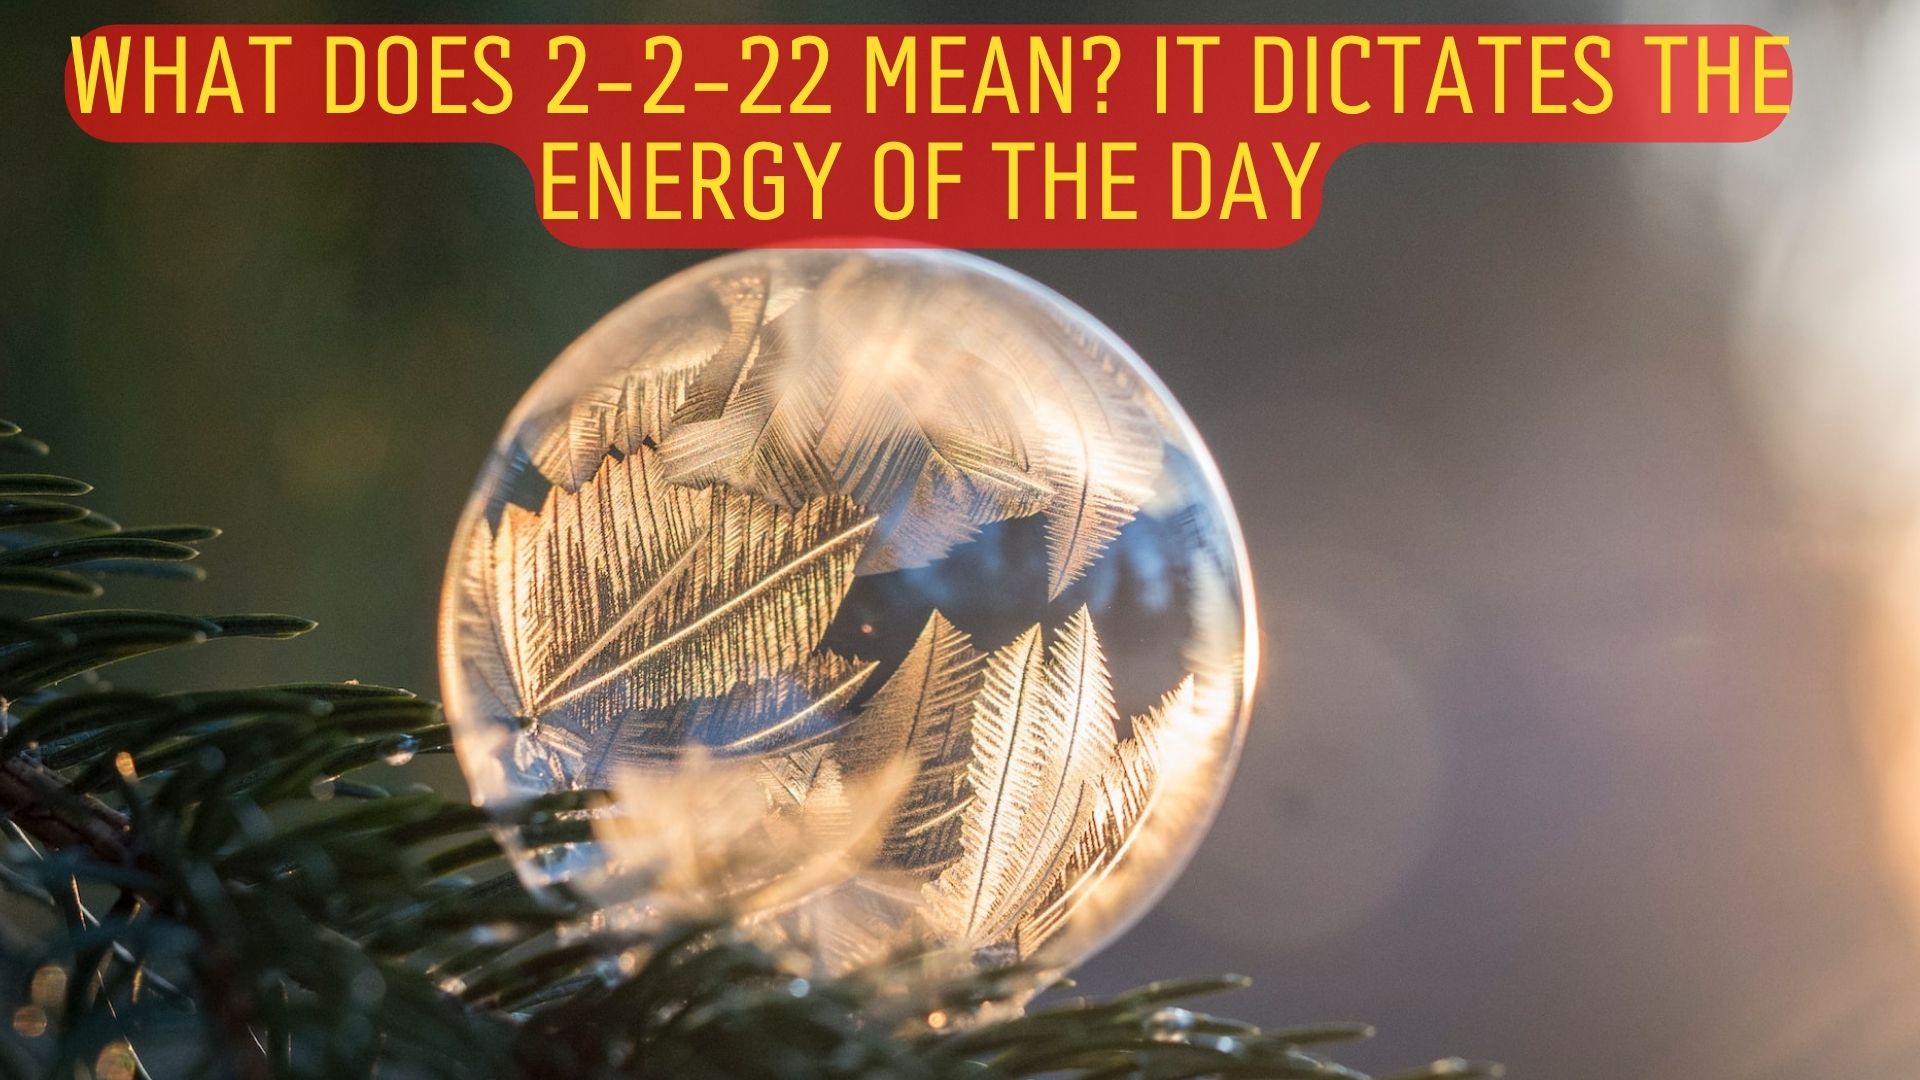 What Does 2-2-22 Mean? It Dictates The Energy Of The Day